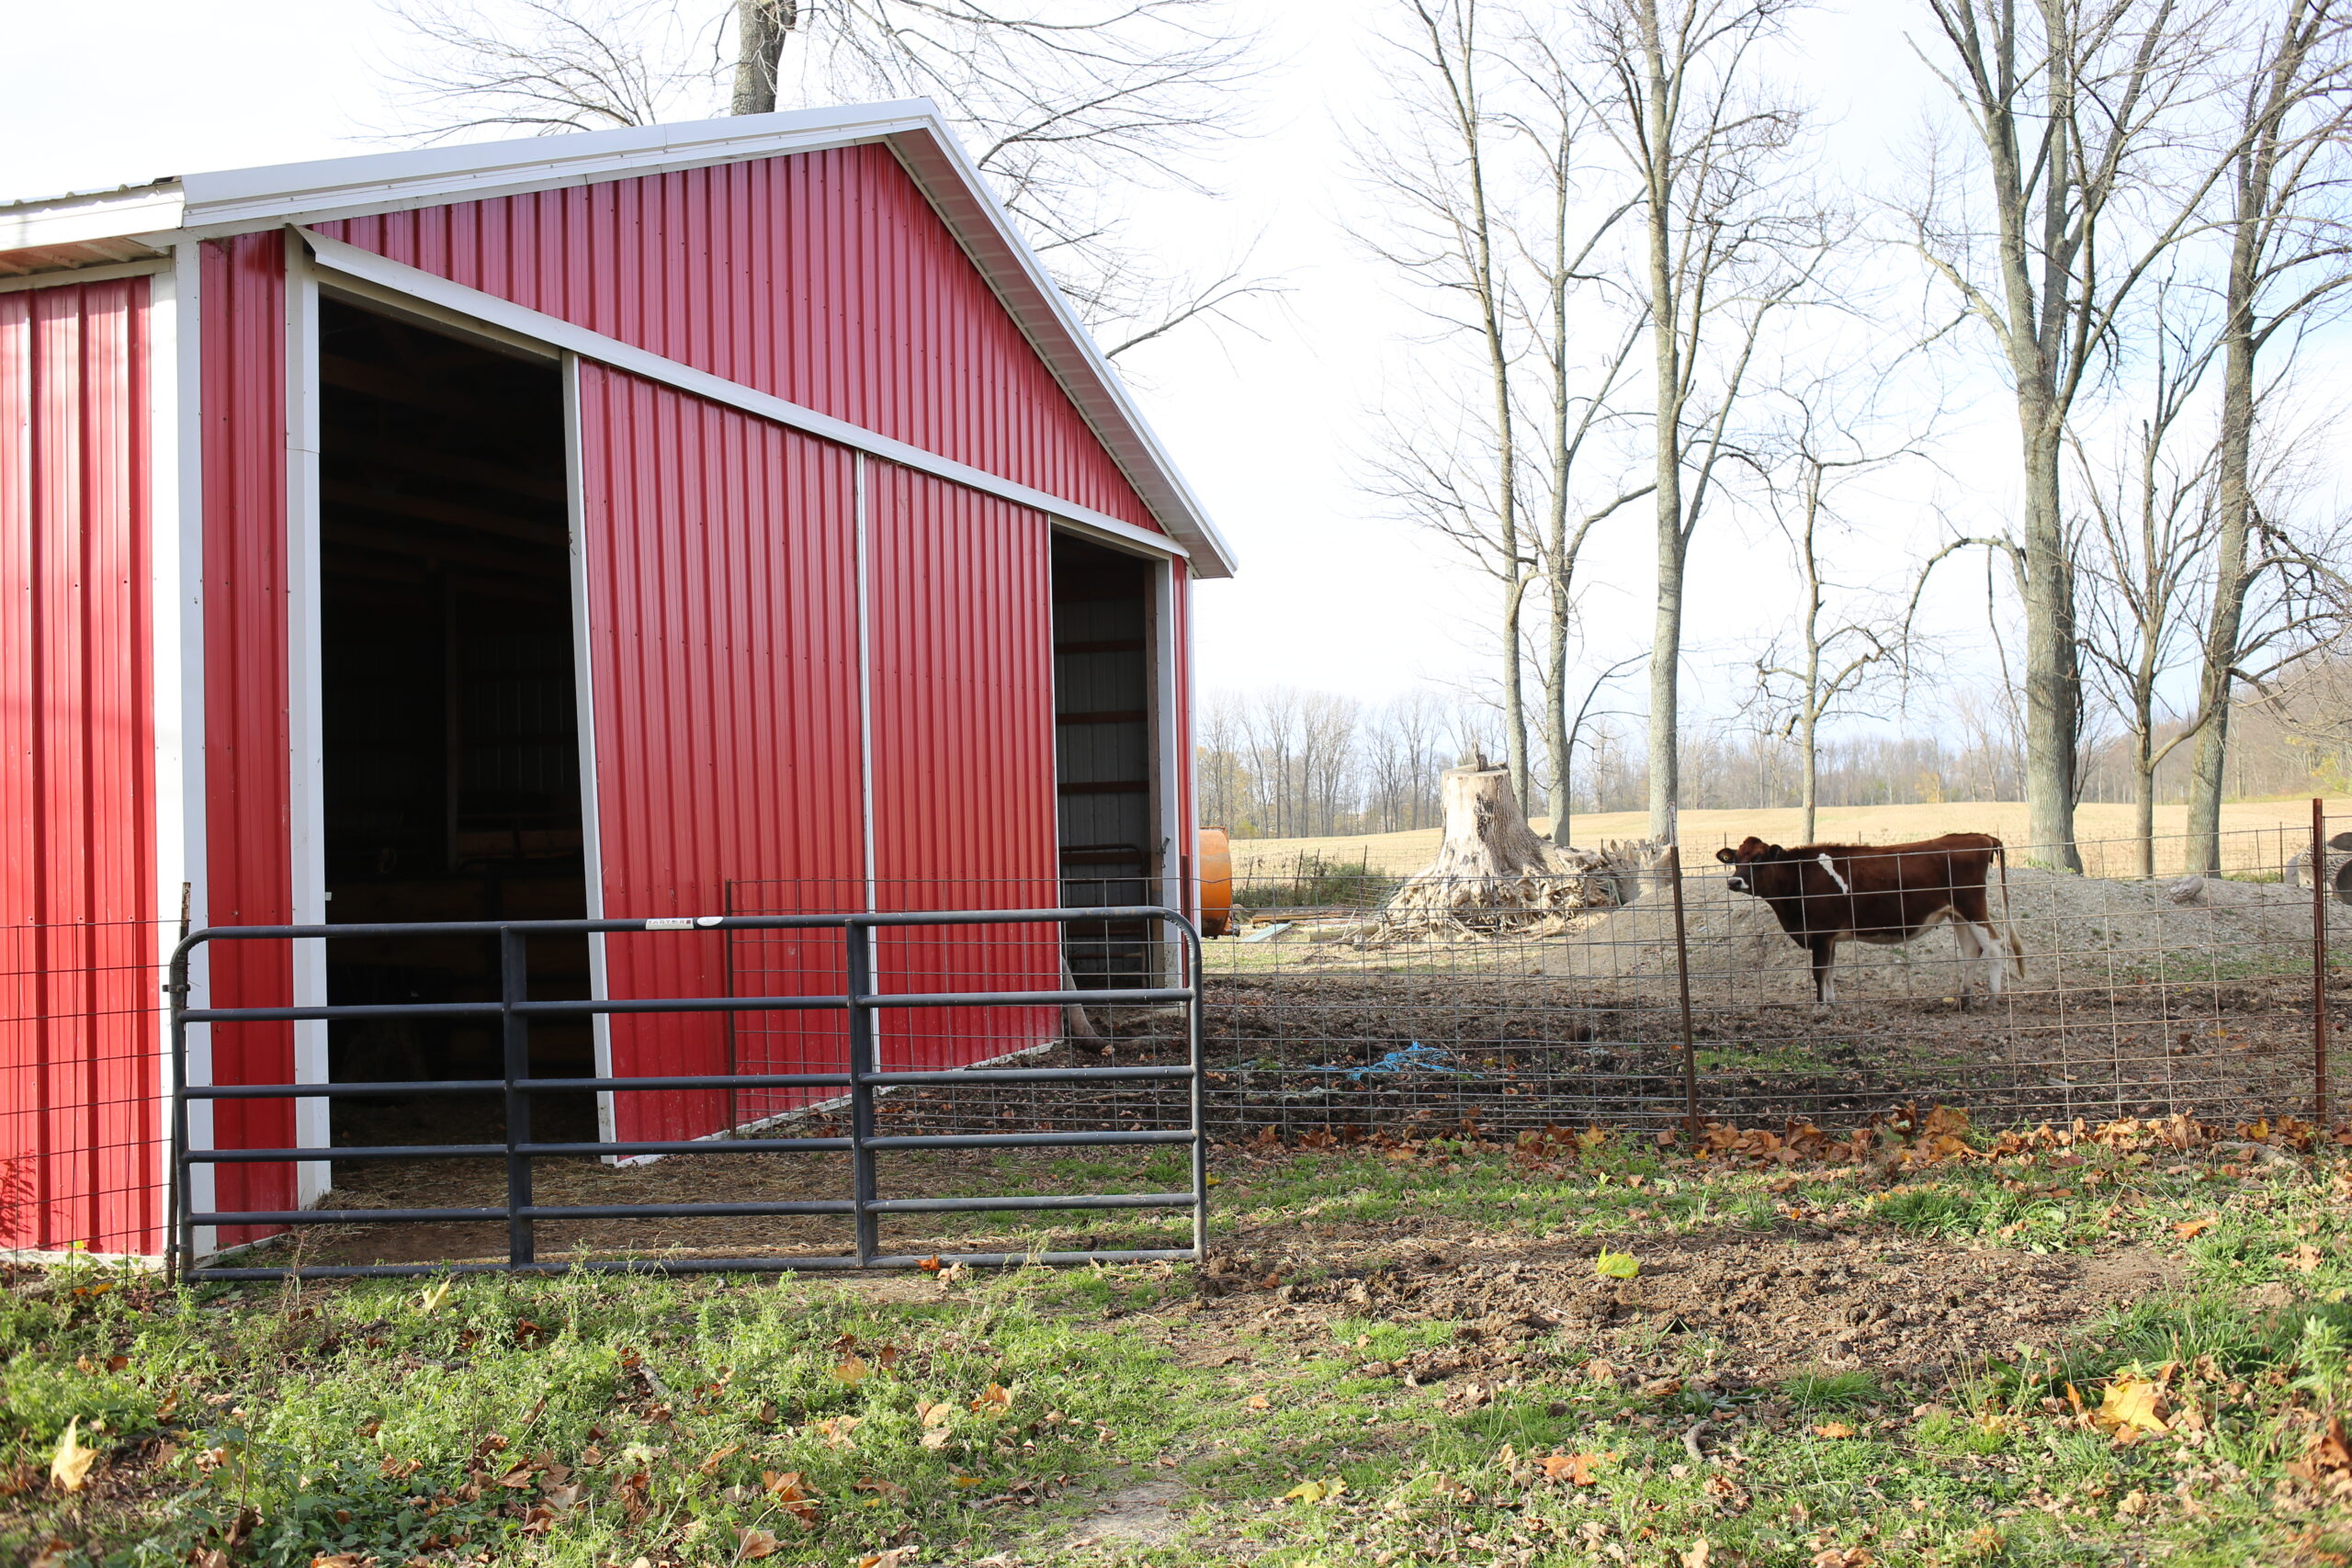 Turning Your Pole Barn Into a Cold Storage Facility - Image